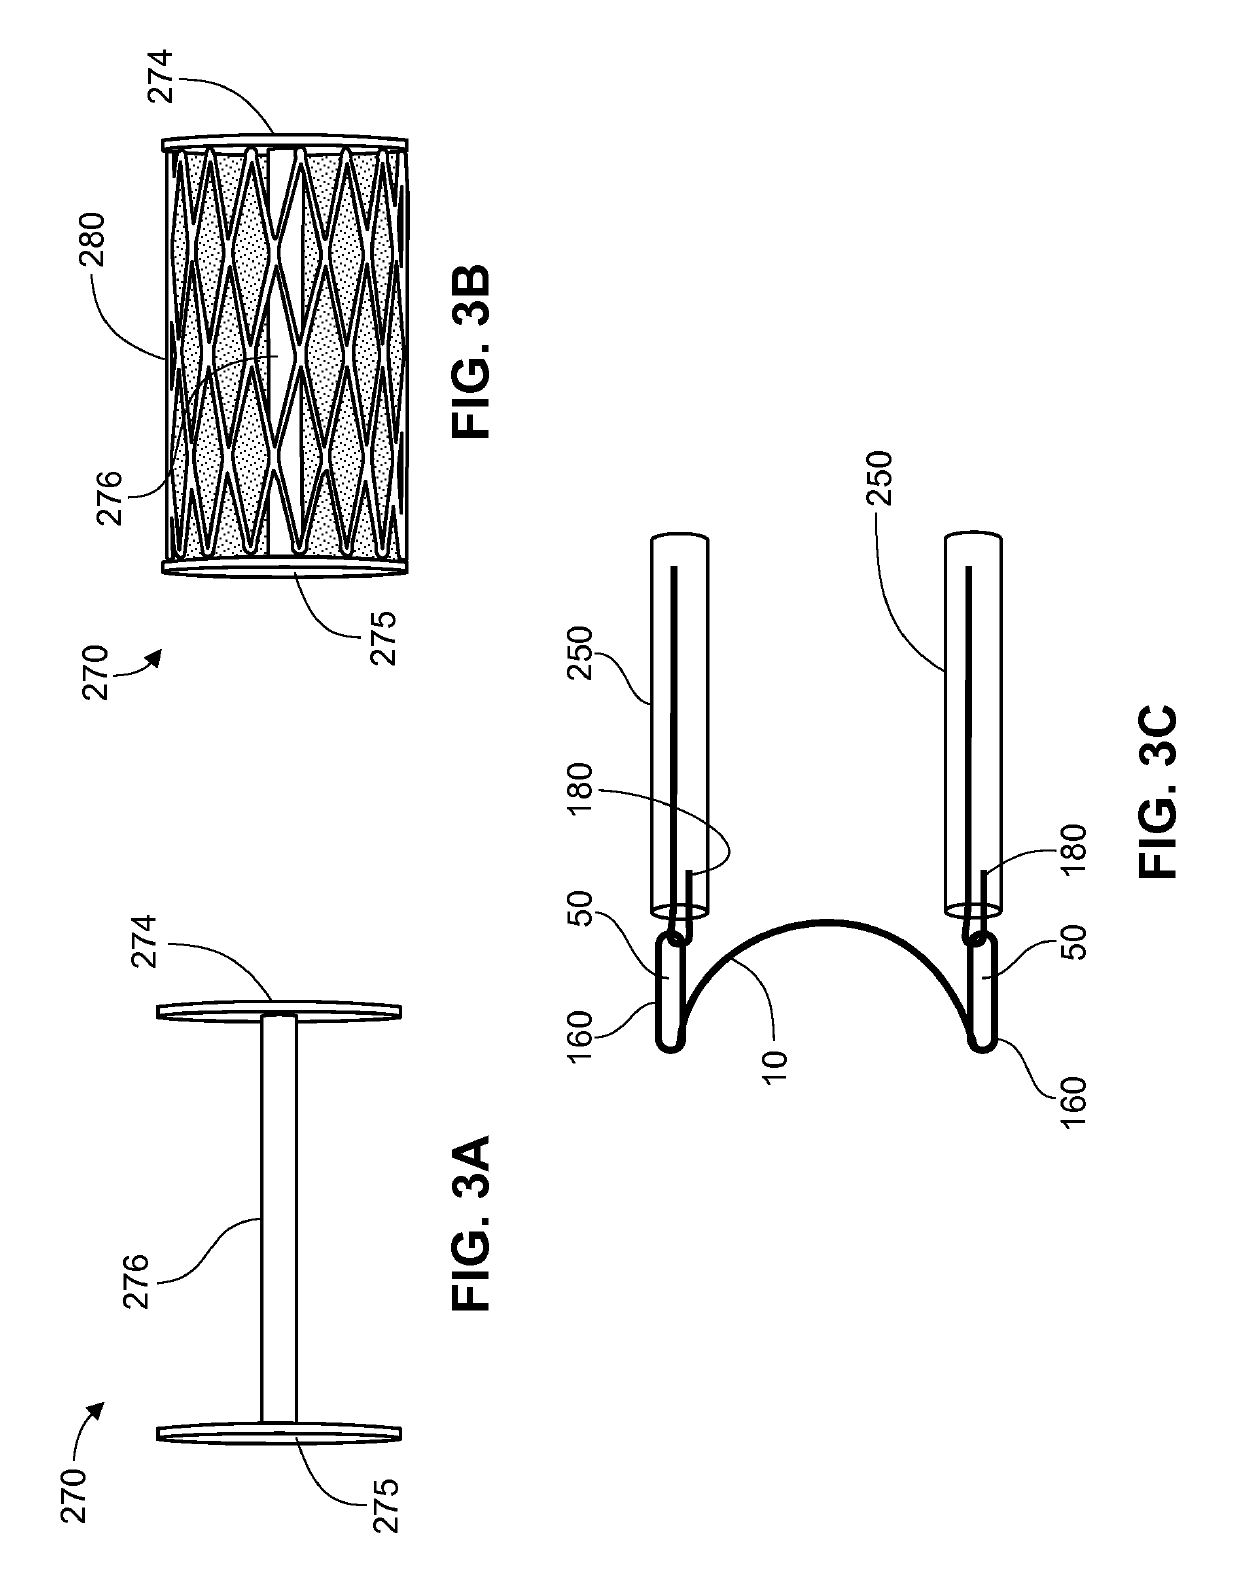 Sutureless valve prosthesis delivery device and methods of use thereof